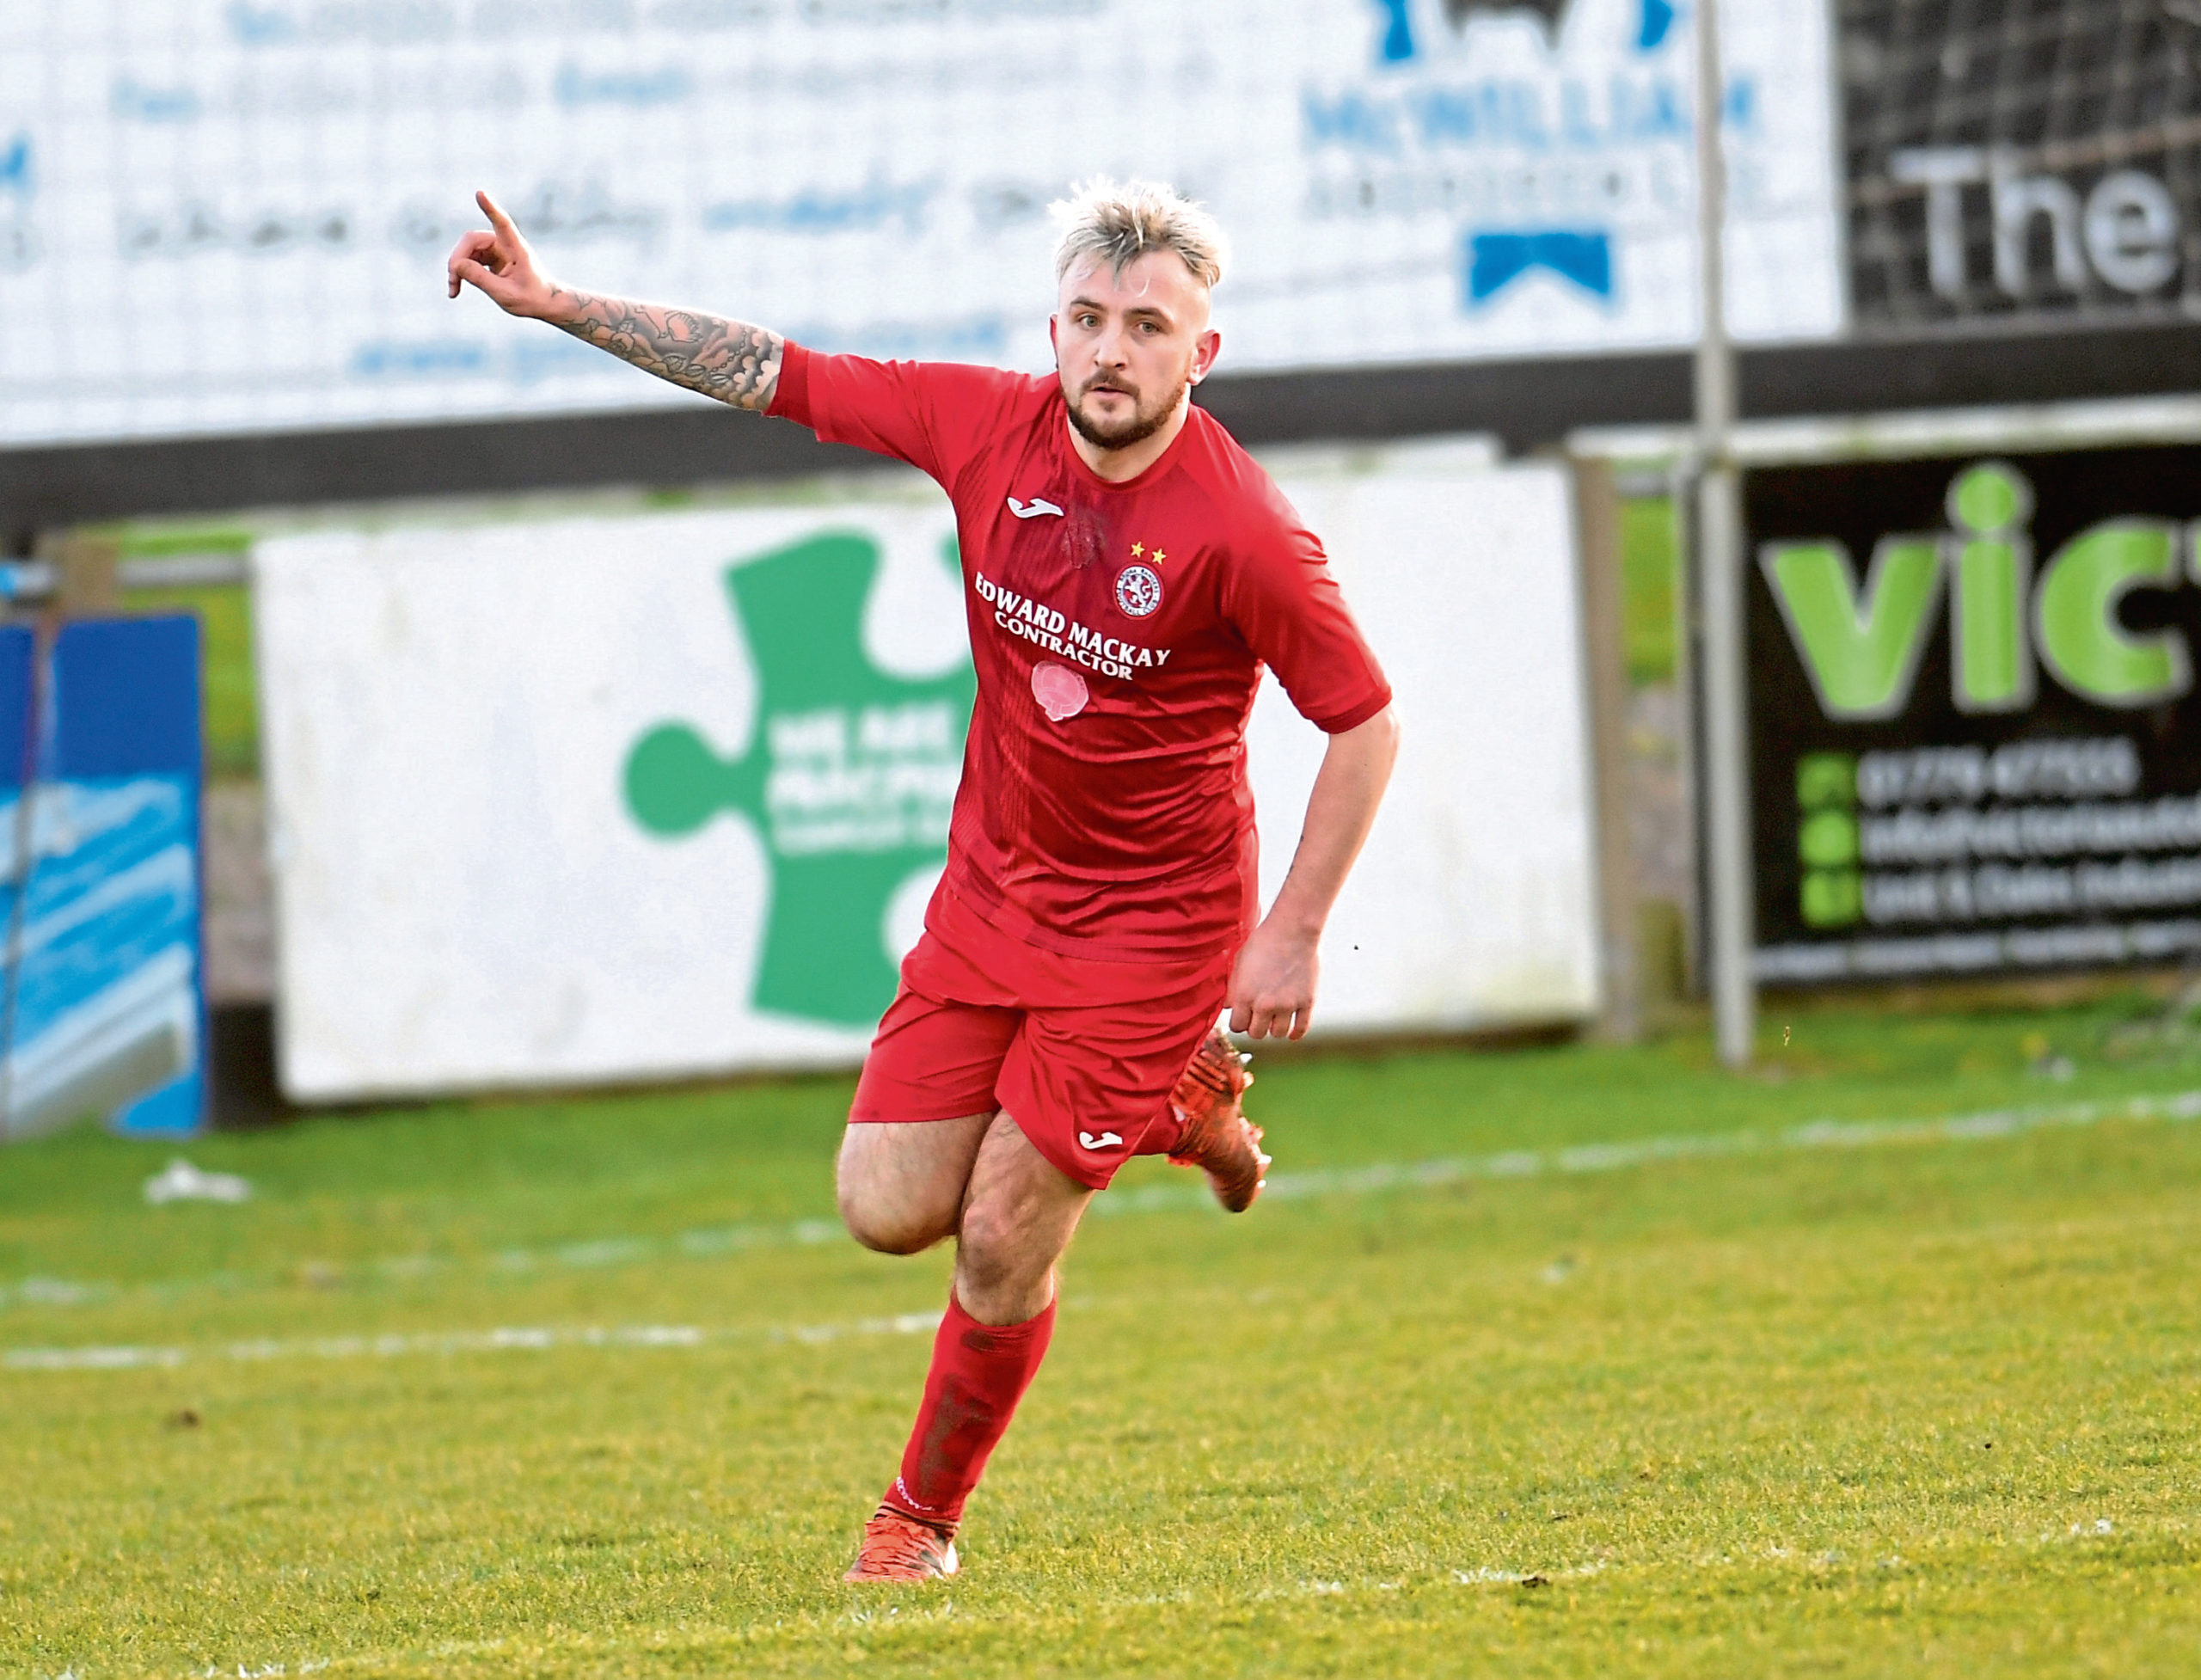 Brora's Paul Brindle scored the winning goal at Bellslea against Fraserburgh.
Picture by Kath Flannery